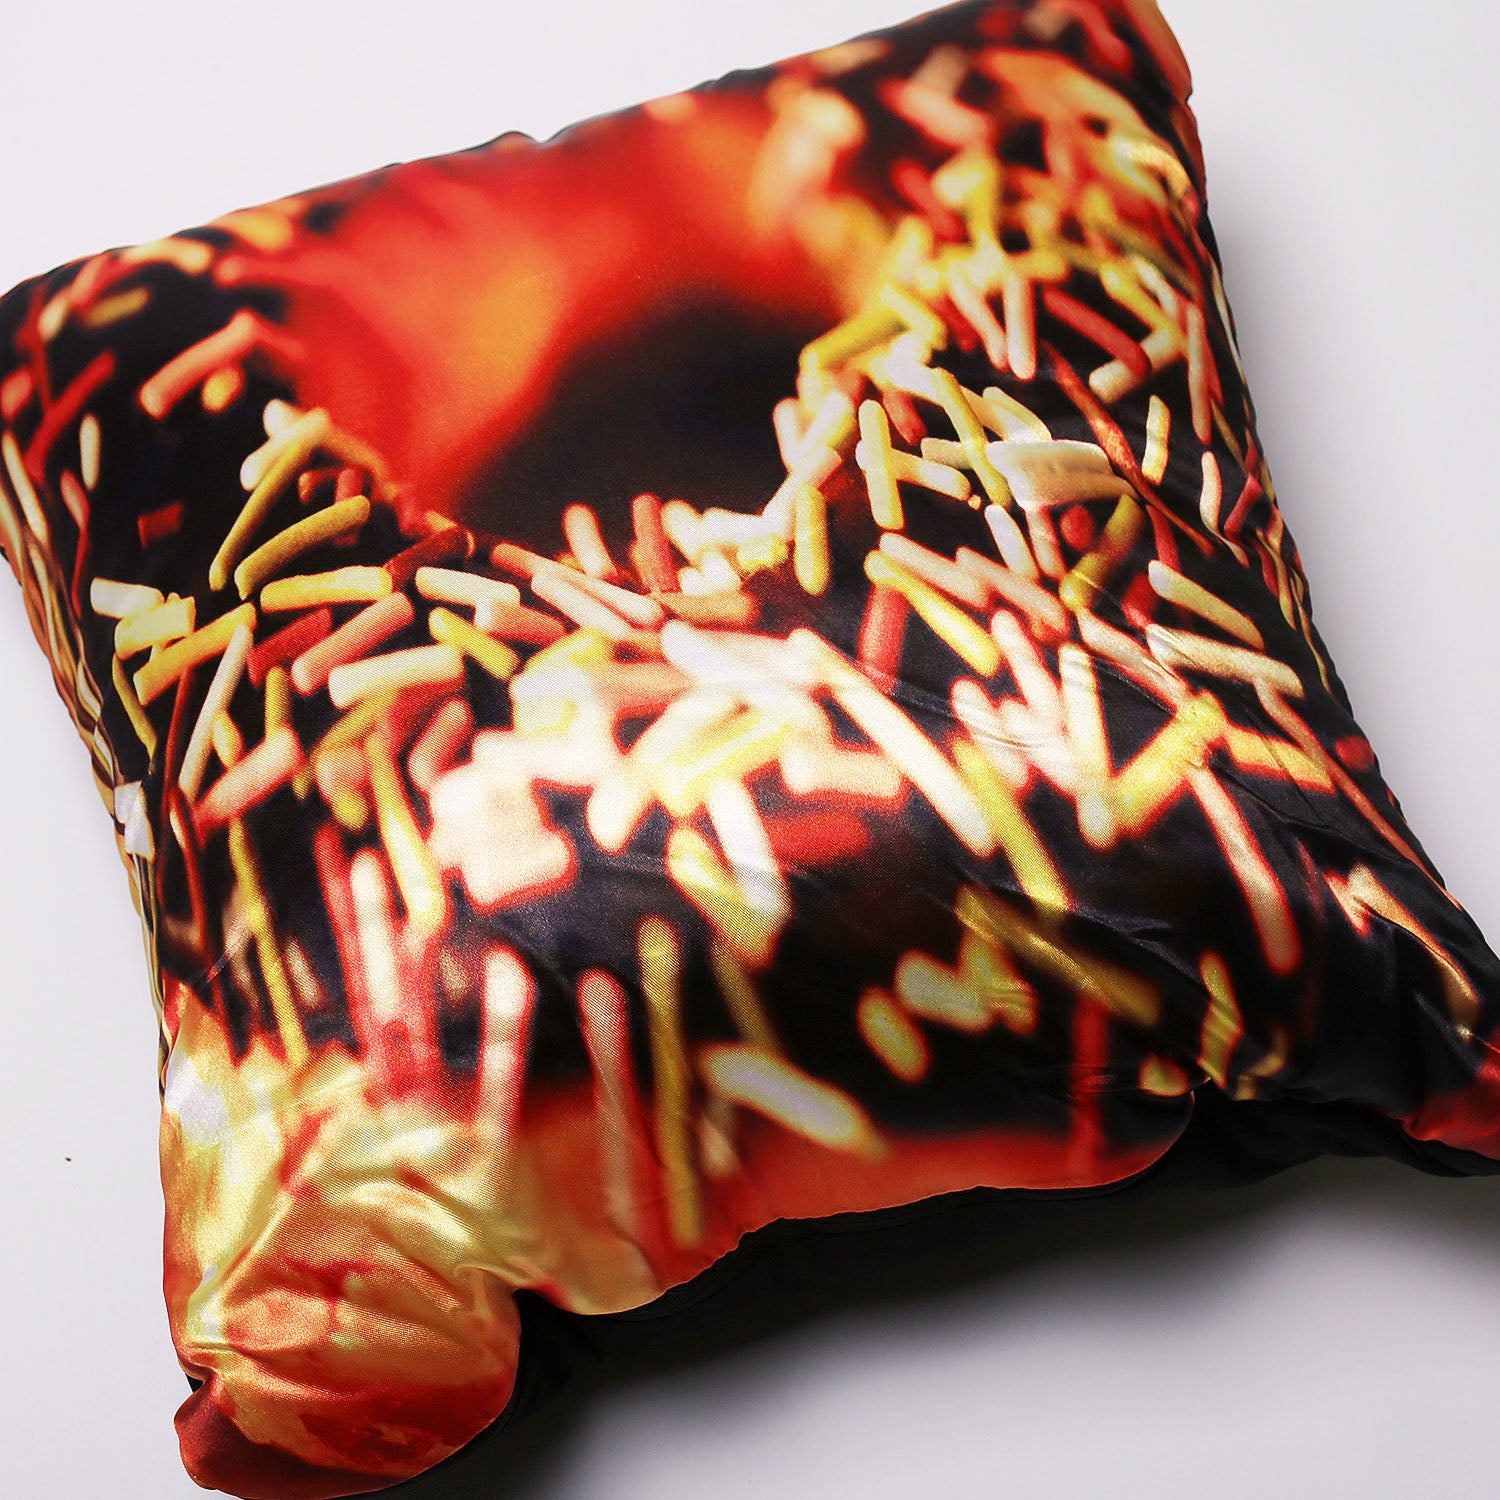 NEW DONUT WITH SPRINKLES 3D DIGITAL PRINTED CUSHION PILLOW